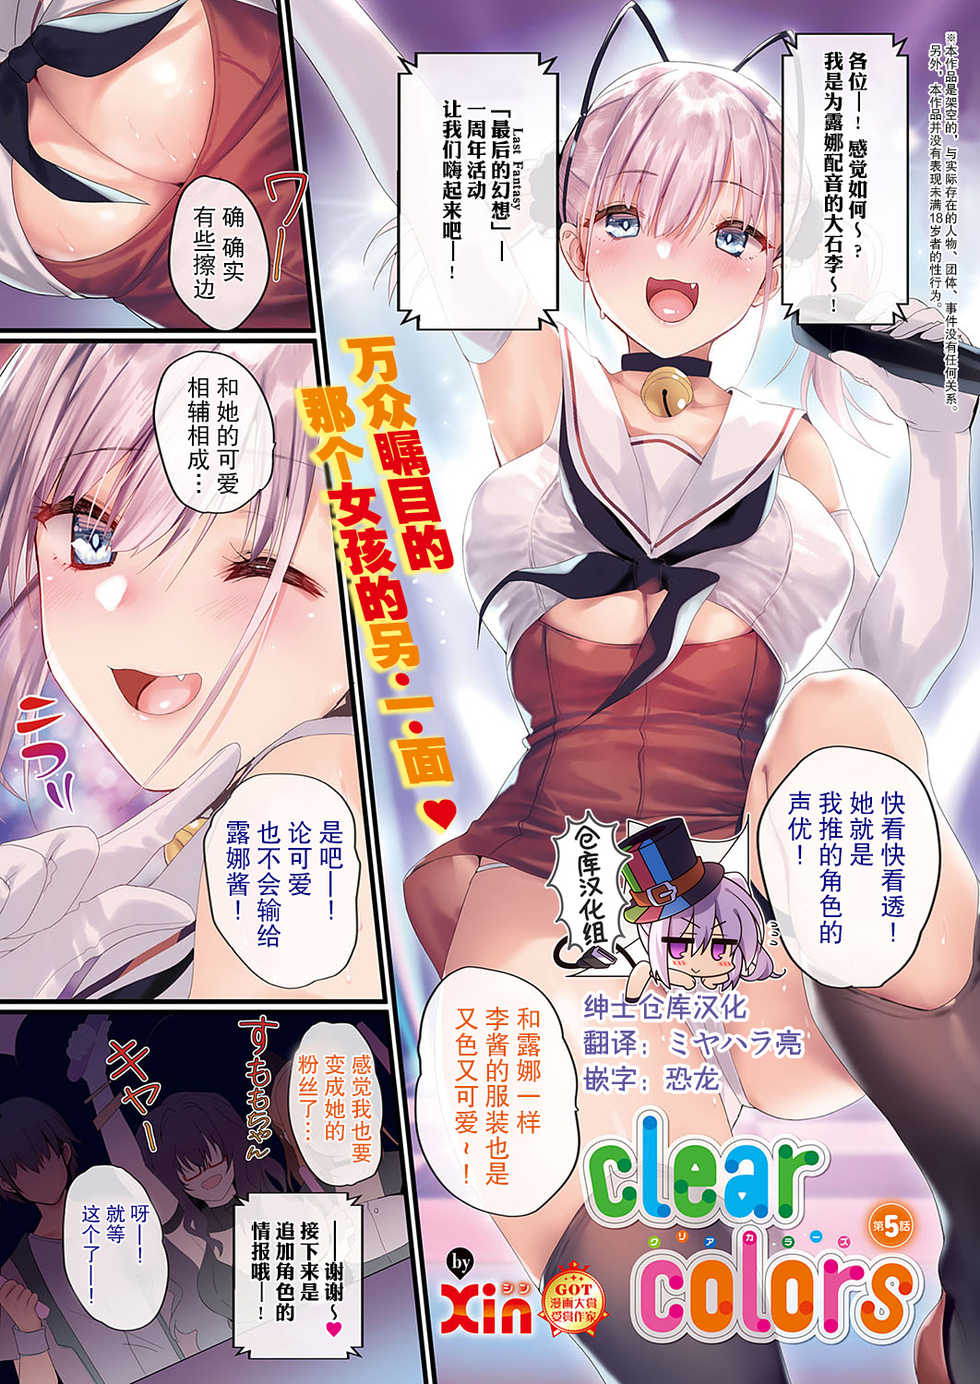 [Xin] clear colors Ch. 5 (COMIC ExE 24) [Chinese] [绅士仓库汉化] [Digital] - Page 1